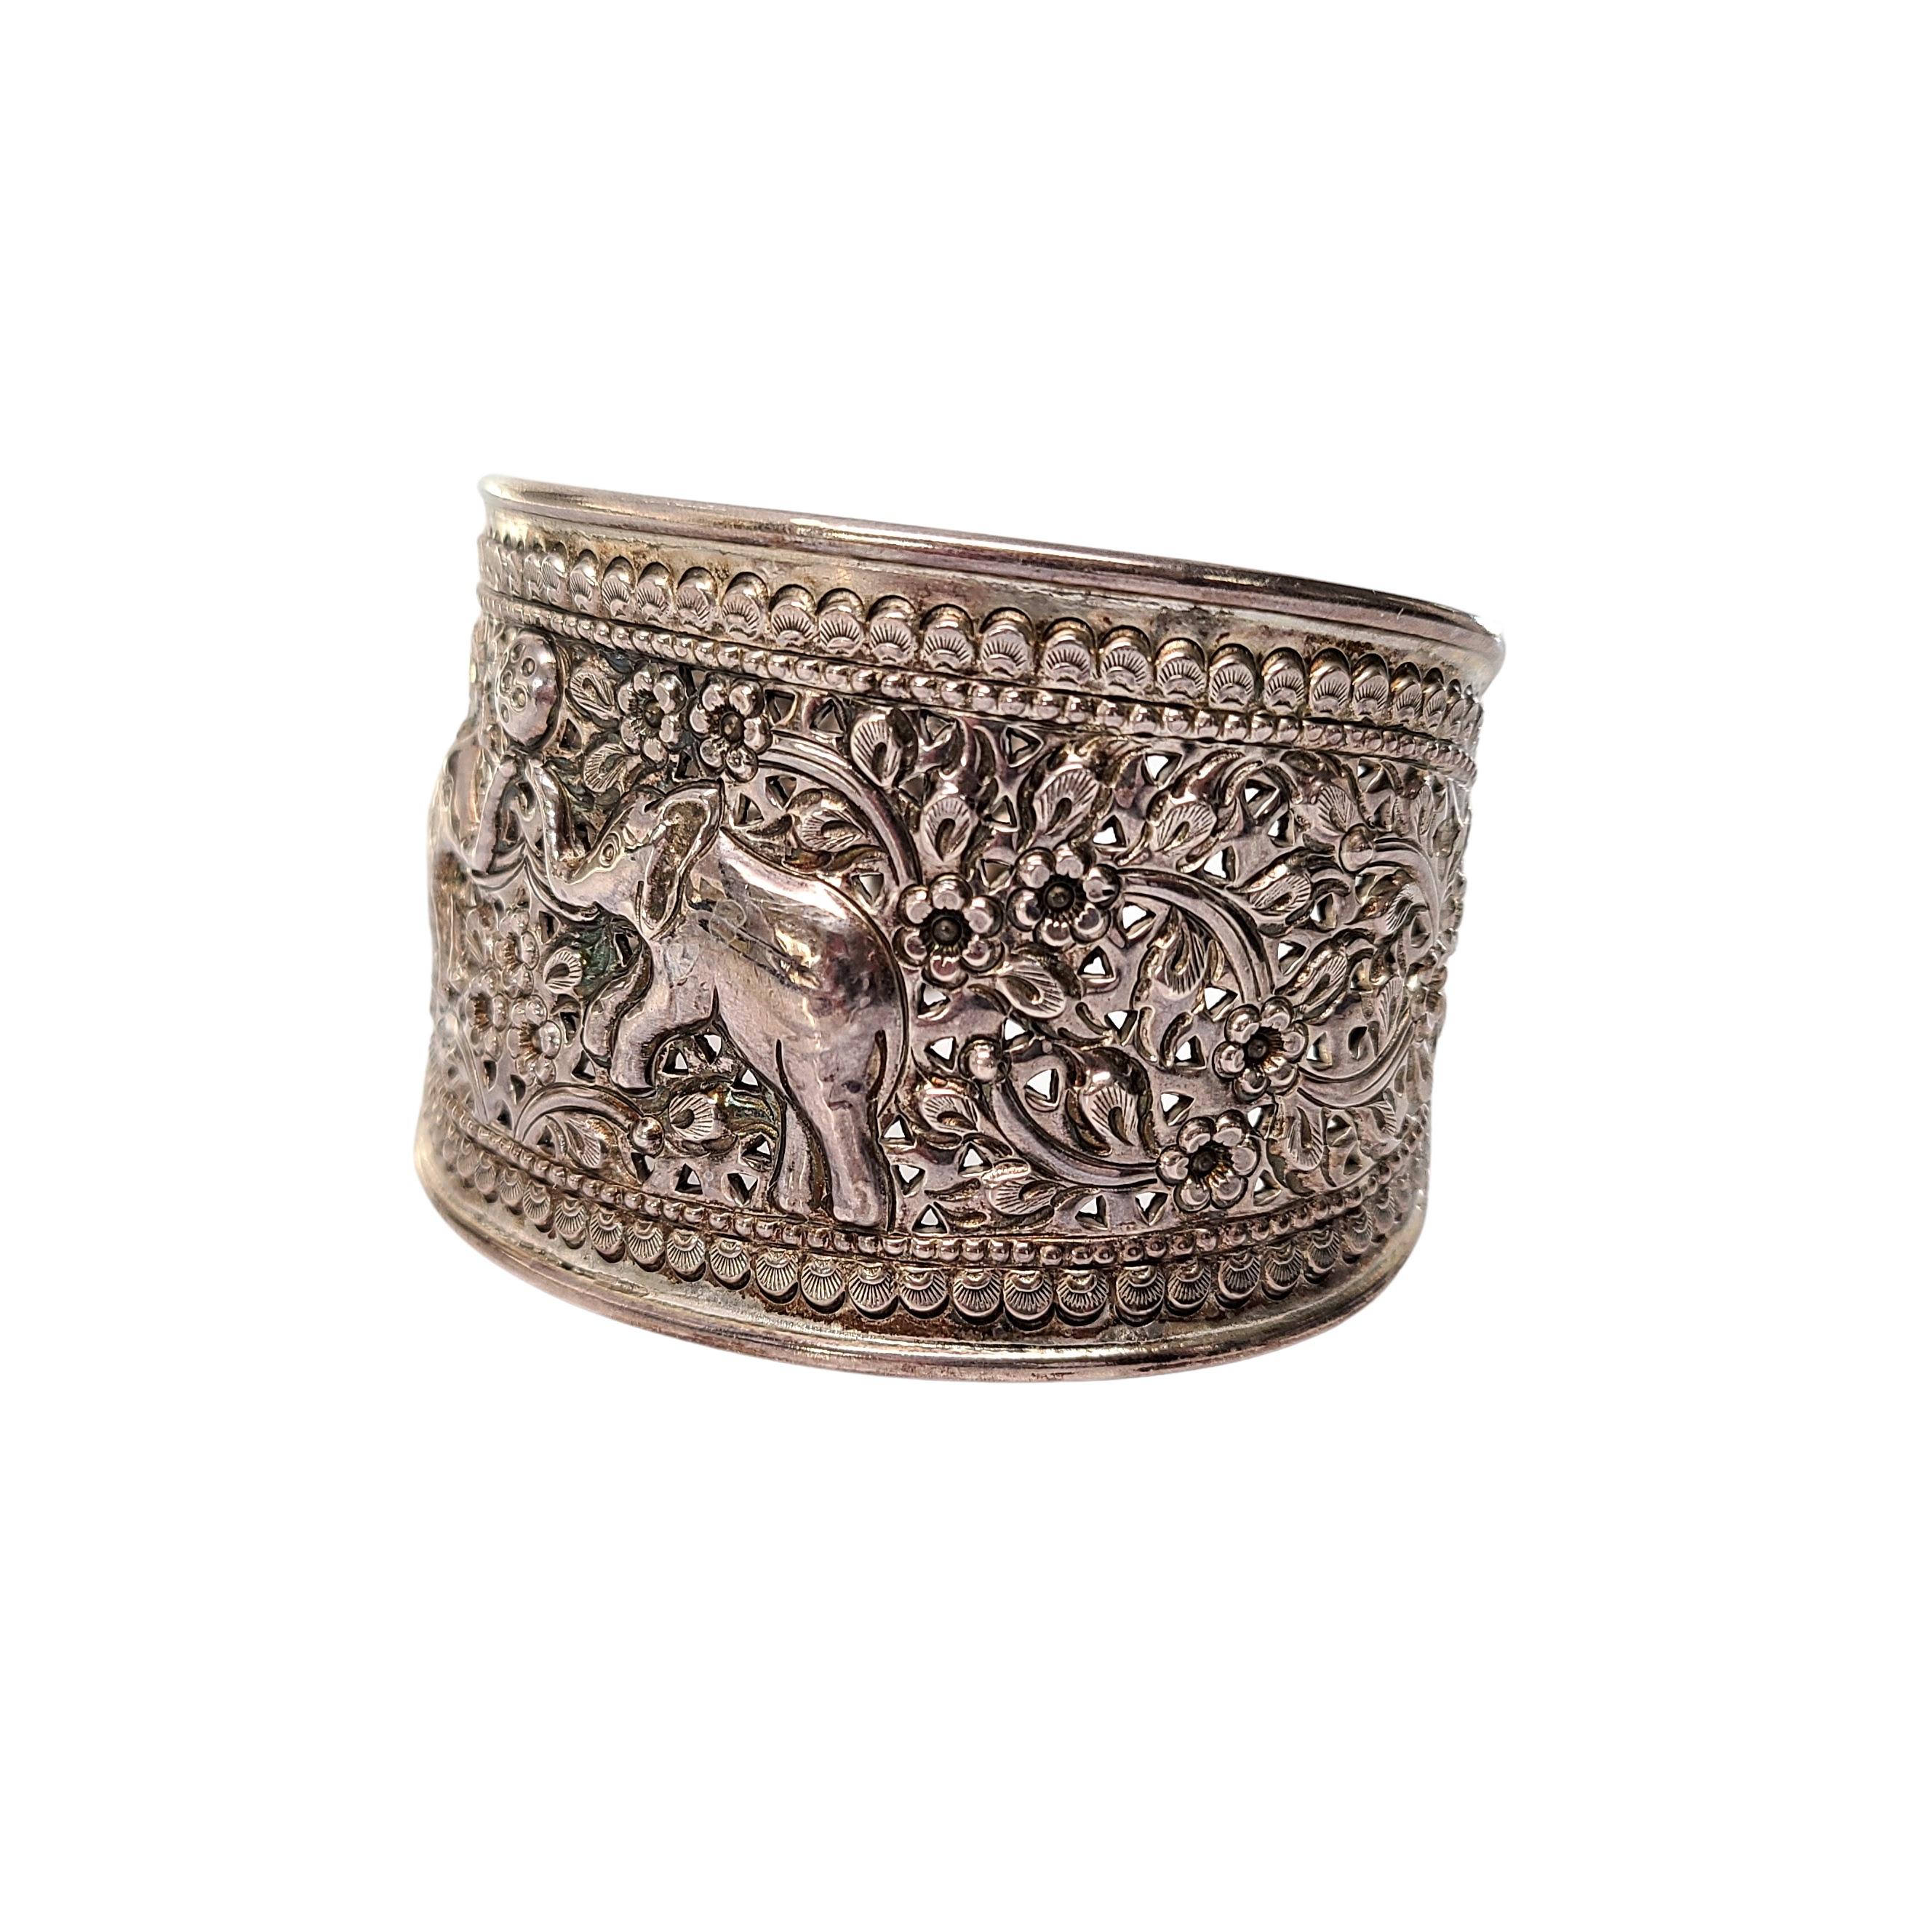 Sterling silver wide elephant cuff bracelet by designer Samuel Benham (BJC).

Beautiful repousse design os 2 elephants playing with a ball on a floral background. 

Measures approx 7